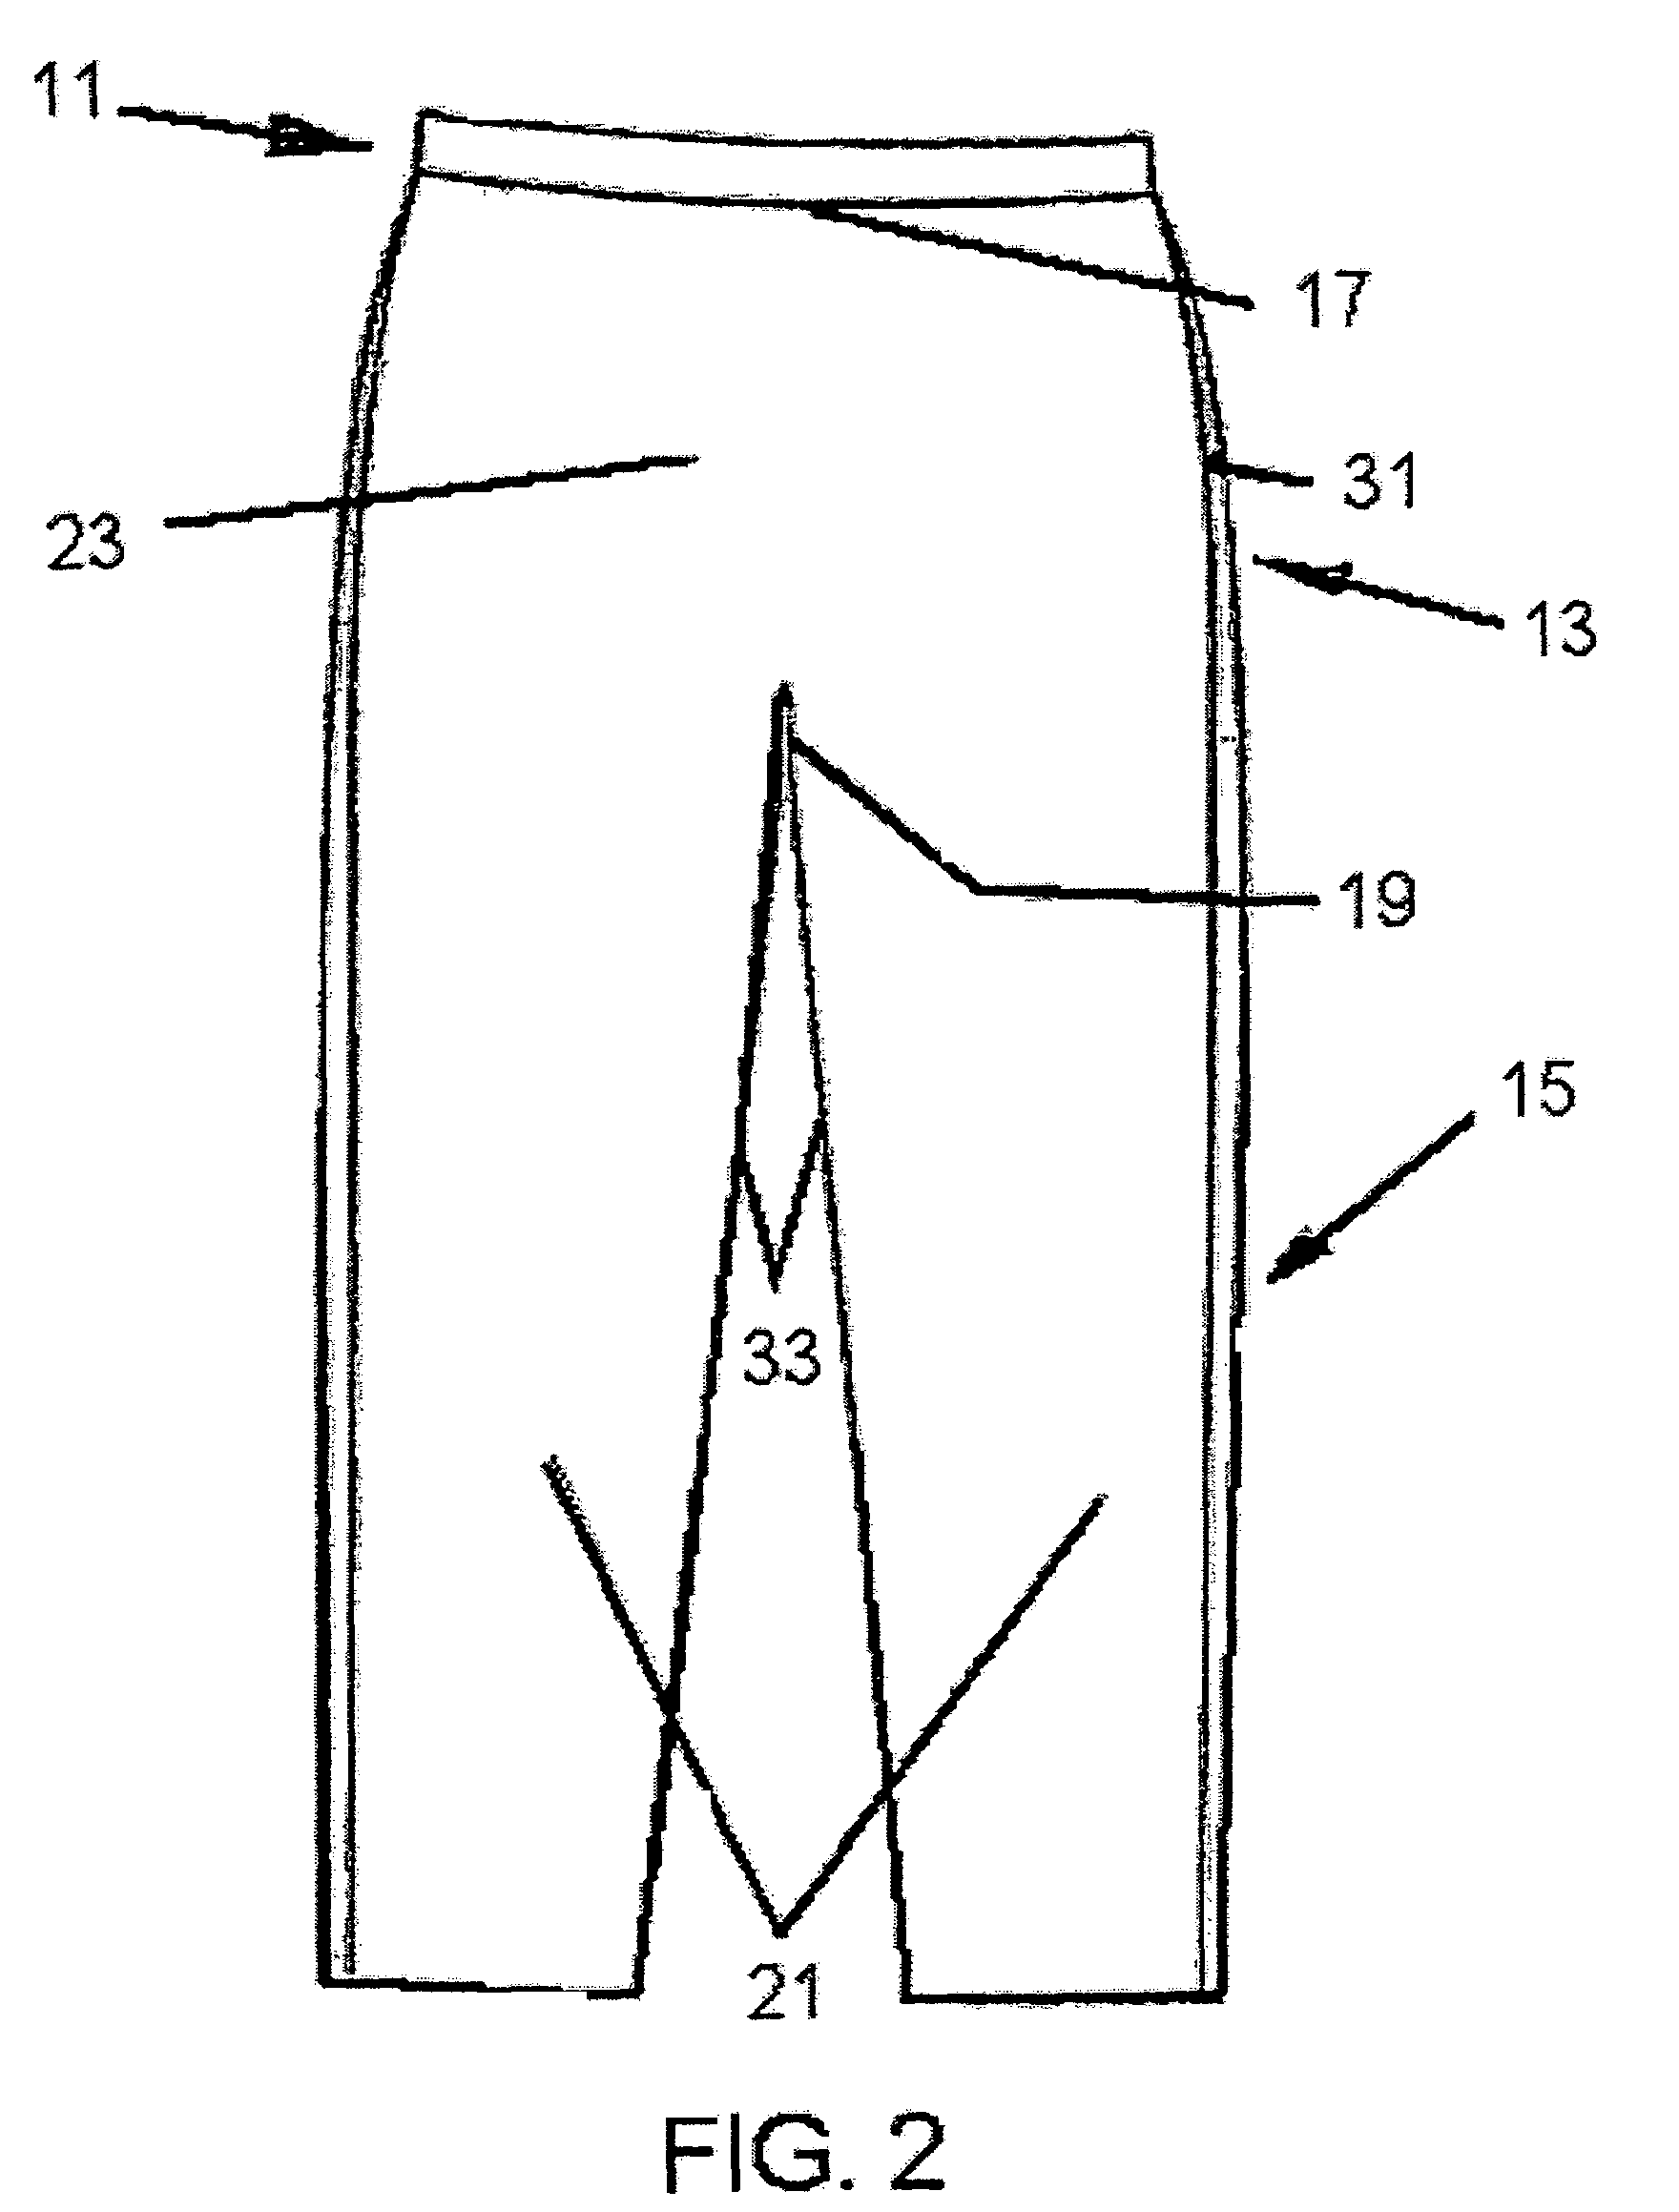 Garment with lifting feature